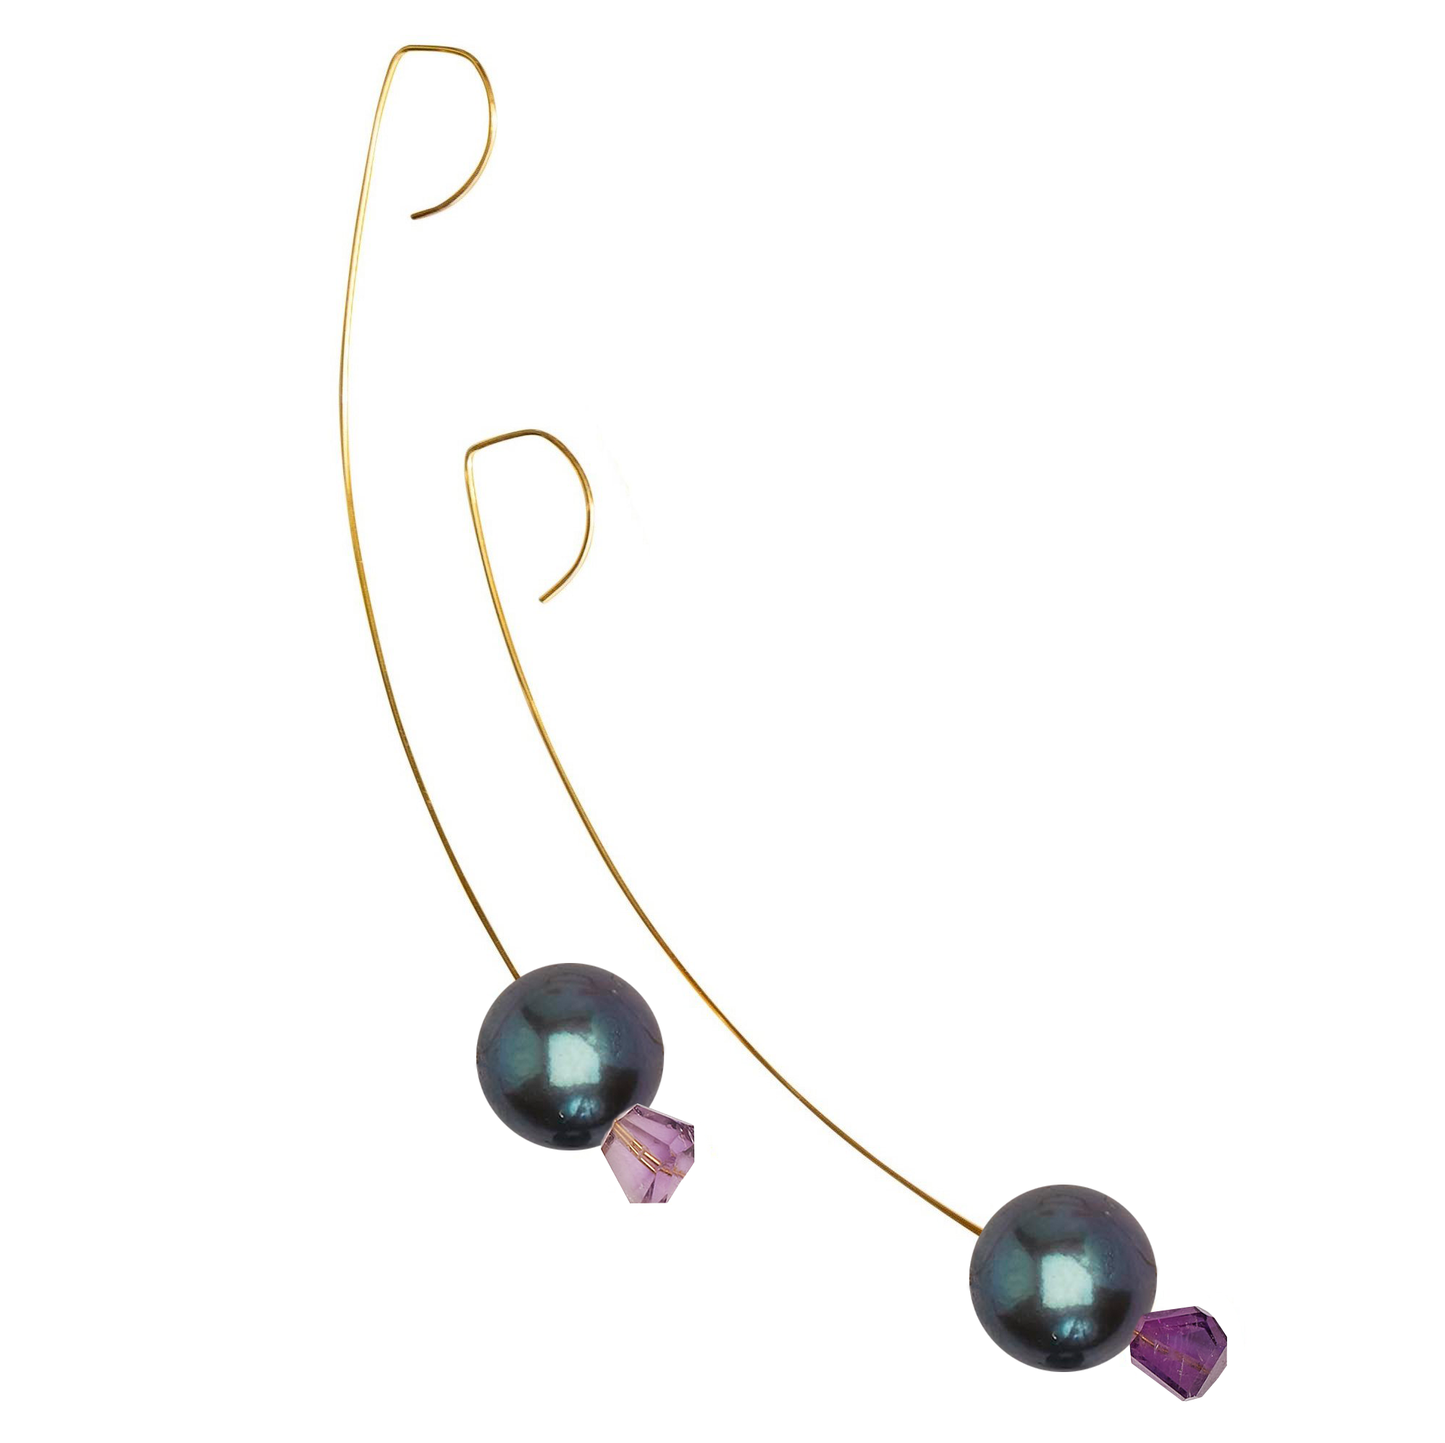 Medium Drop Earrings with Purple Amethyst Gemstone and Freshwater Pearls with colour options